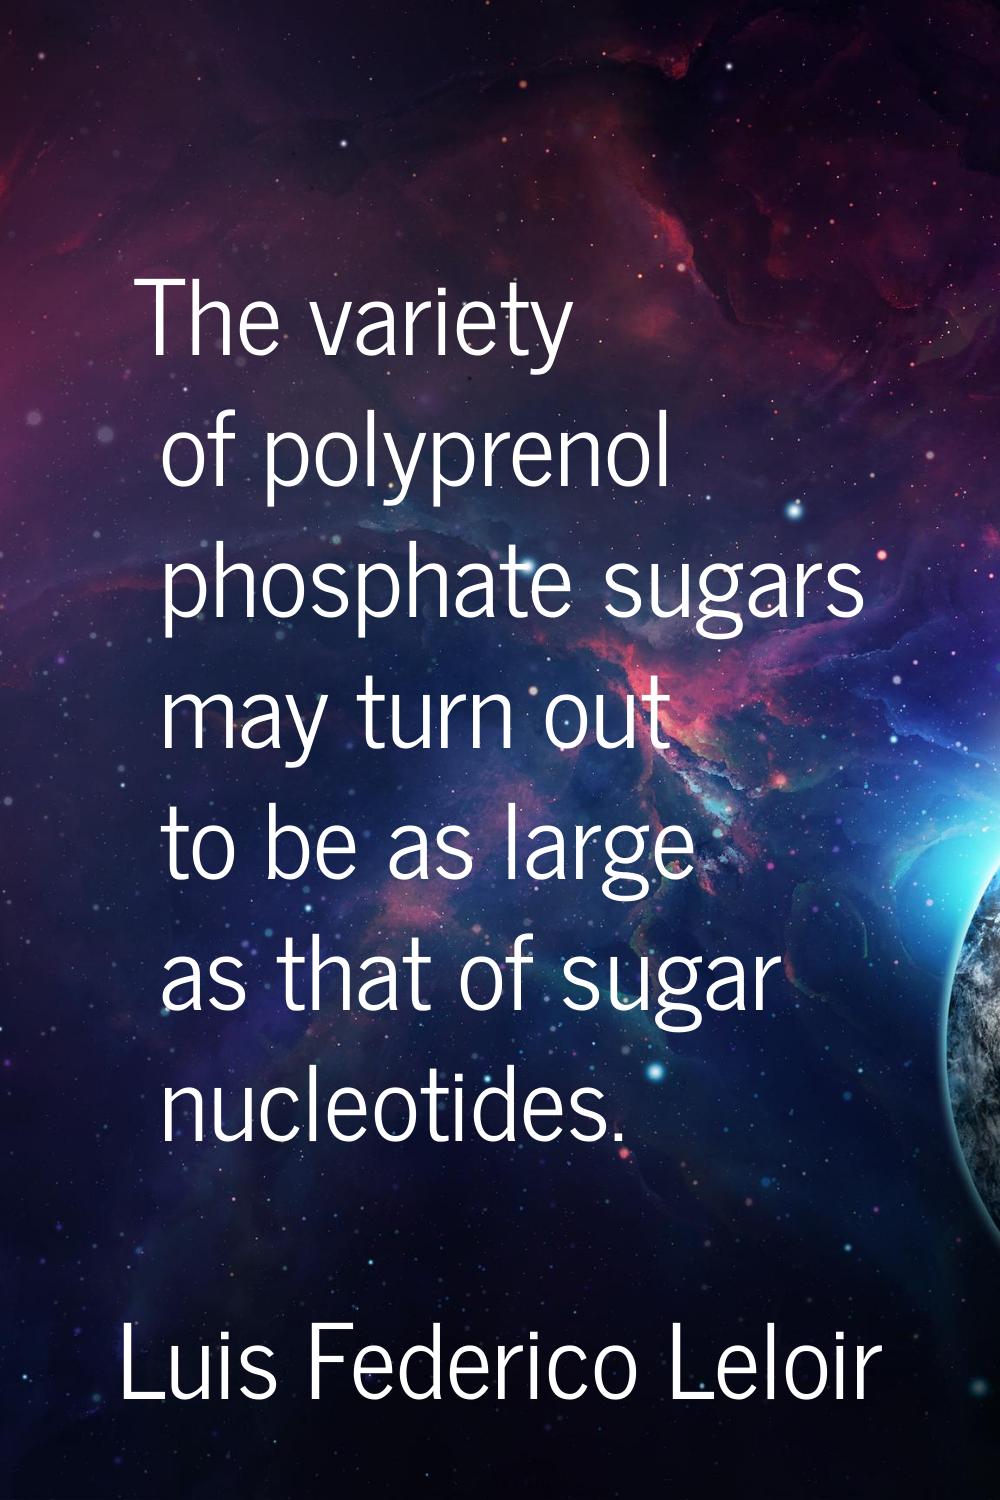 The variety of polyprenol phosphate sugars may turn out to be as large as that of sugar nucleotides